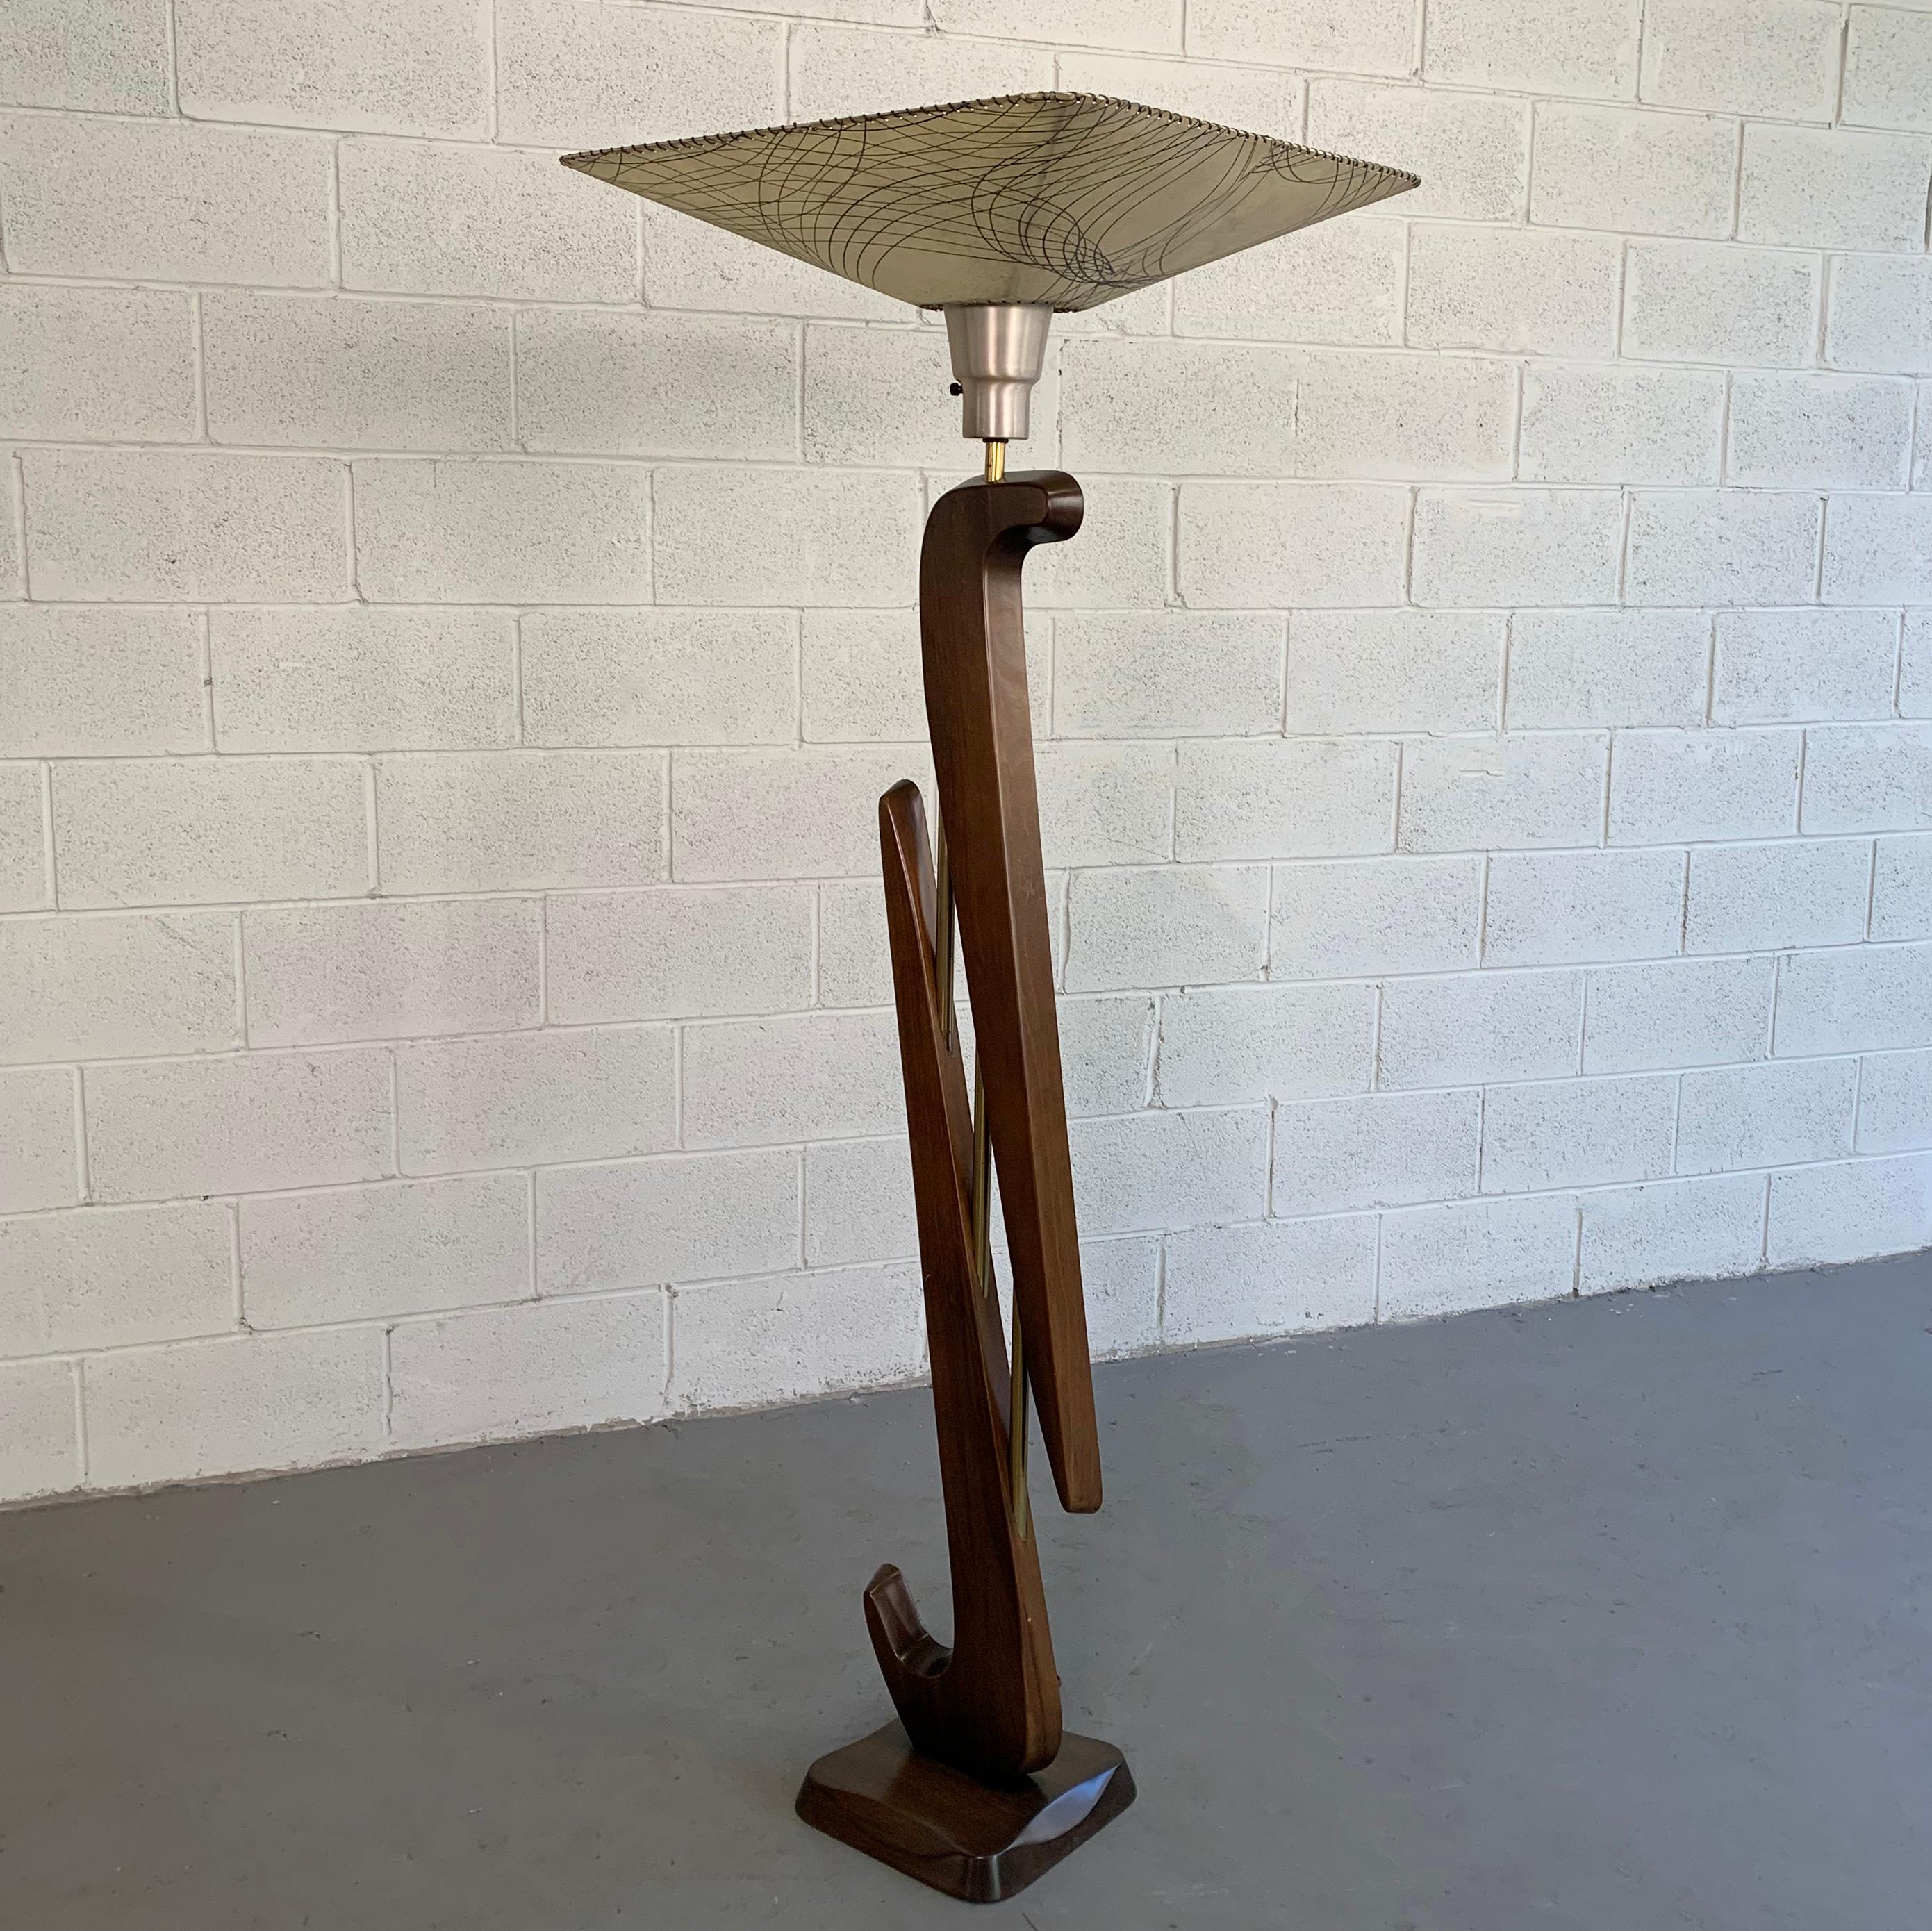 Monumental, Mid-Century Modern, torchère, floor lamp attributed to Modeline Lamp Co., features a sculptural, biomorphic, mahogany base with brass accents, spun aluminum socket with it's original parchment shade. The lamp accepts a large socket mogul